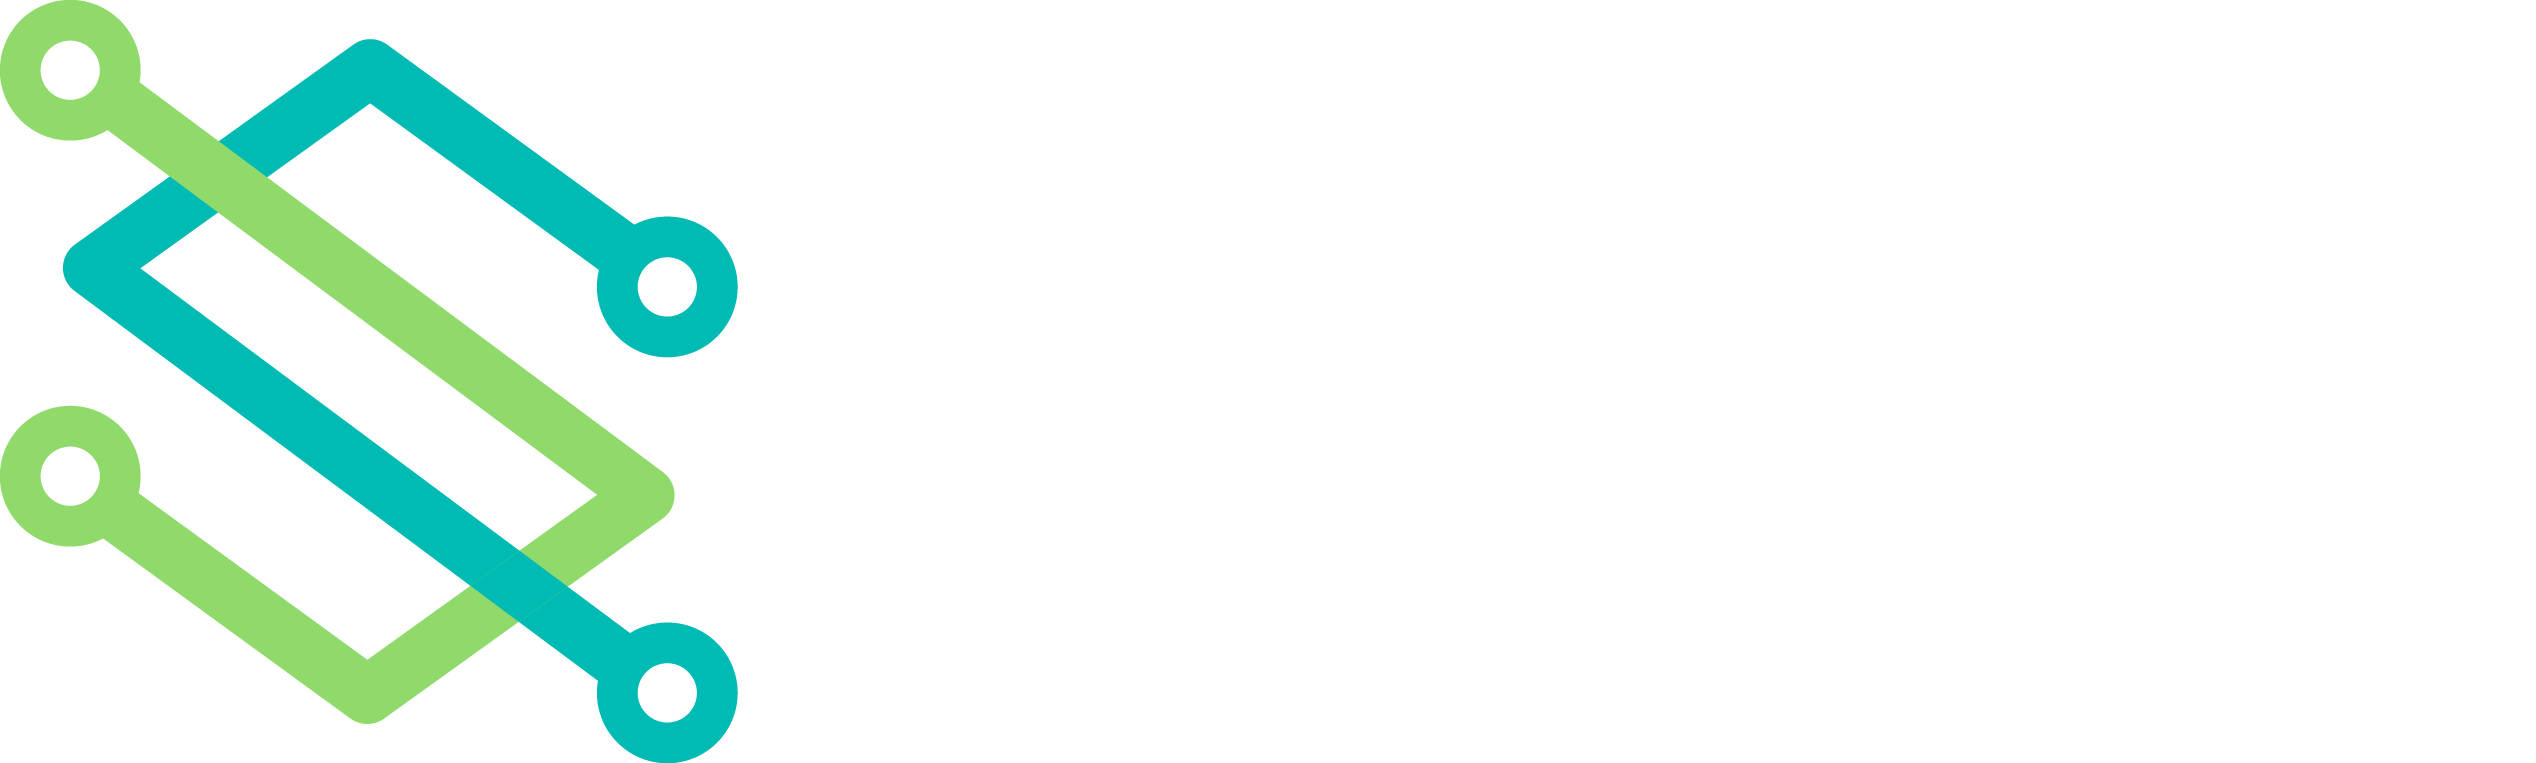 Sdkbin - The marketplace for software developers.